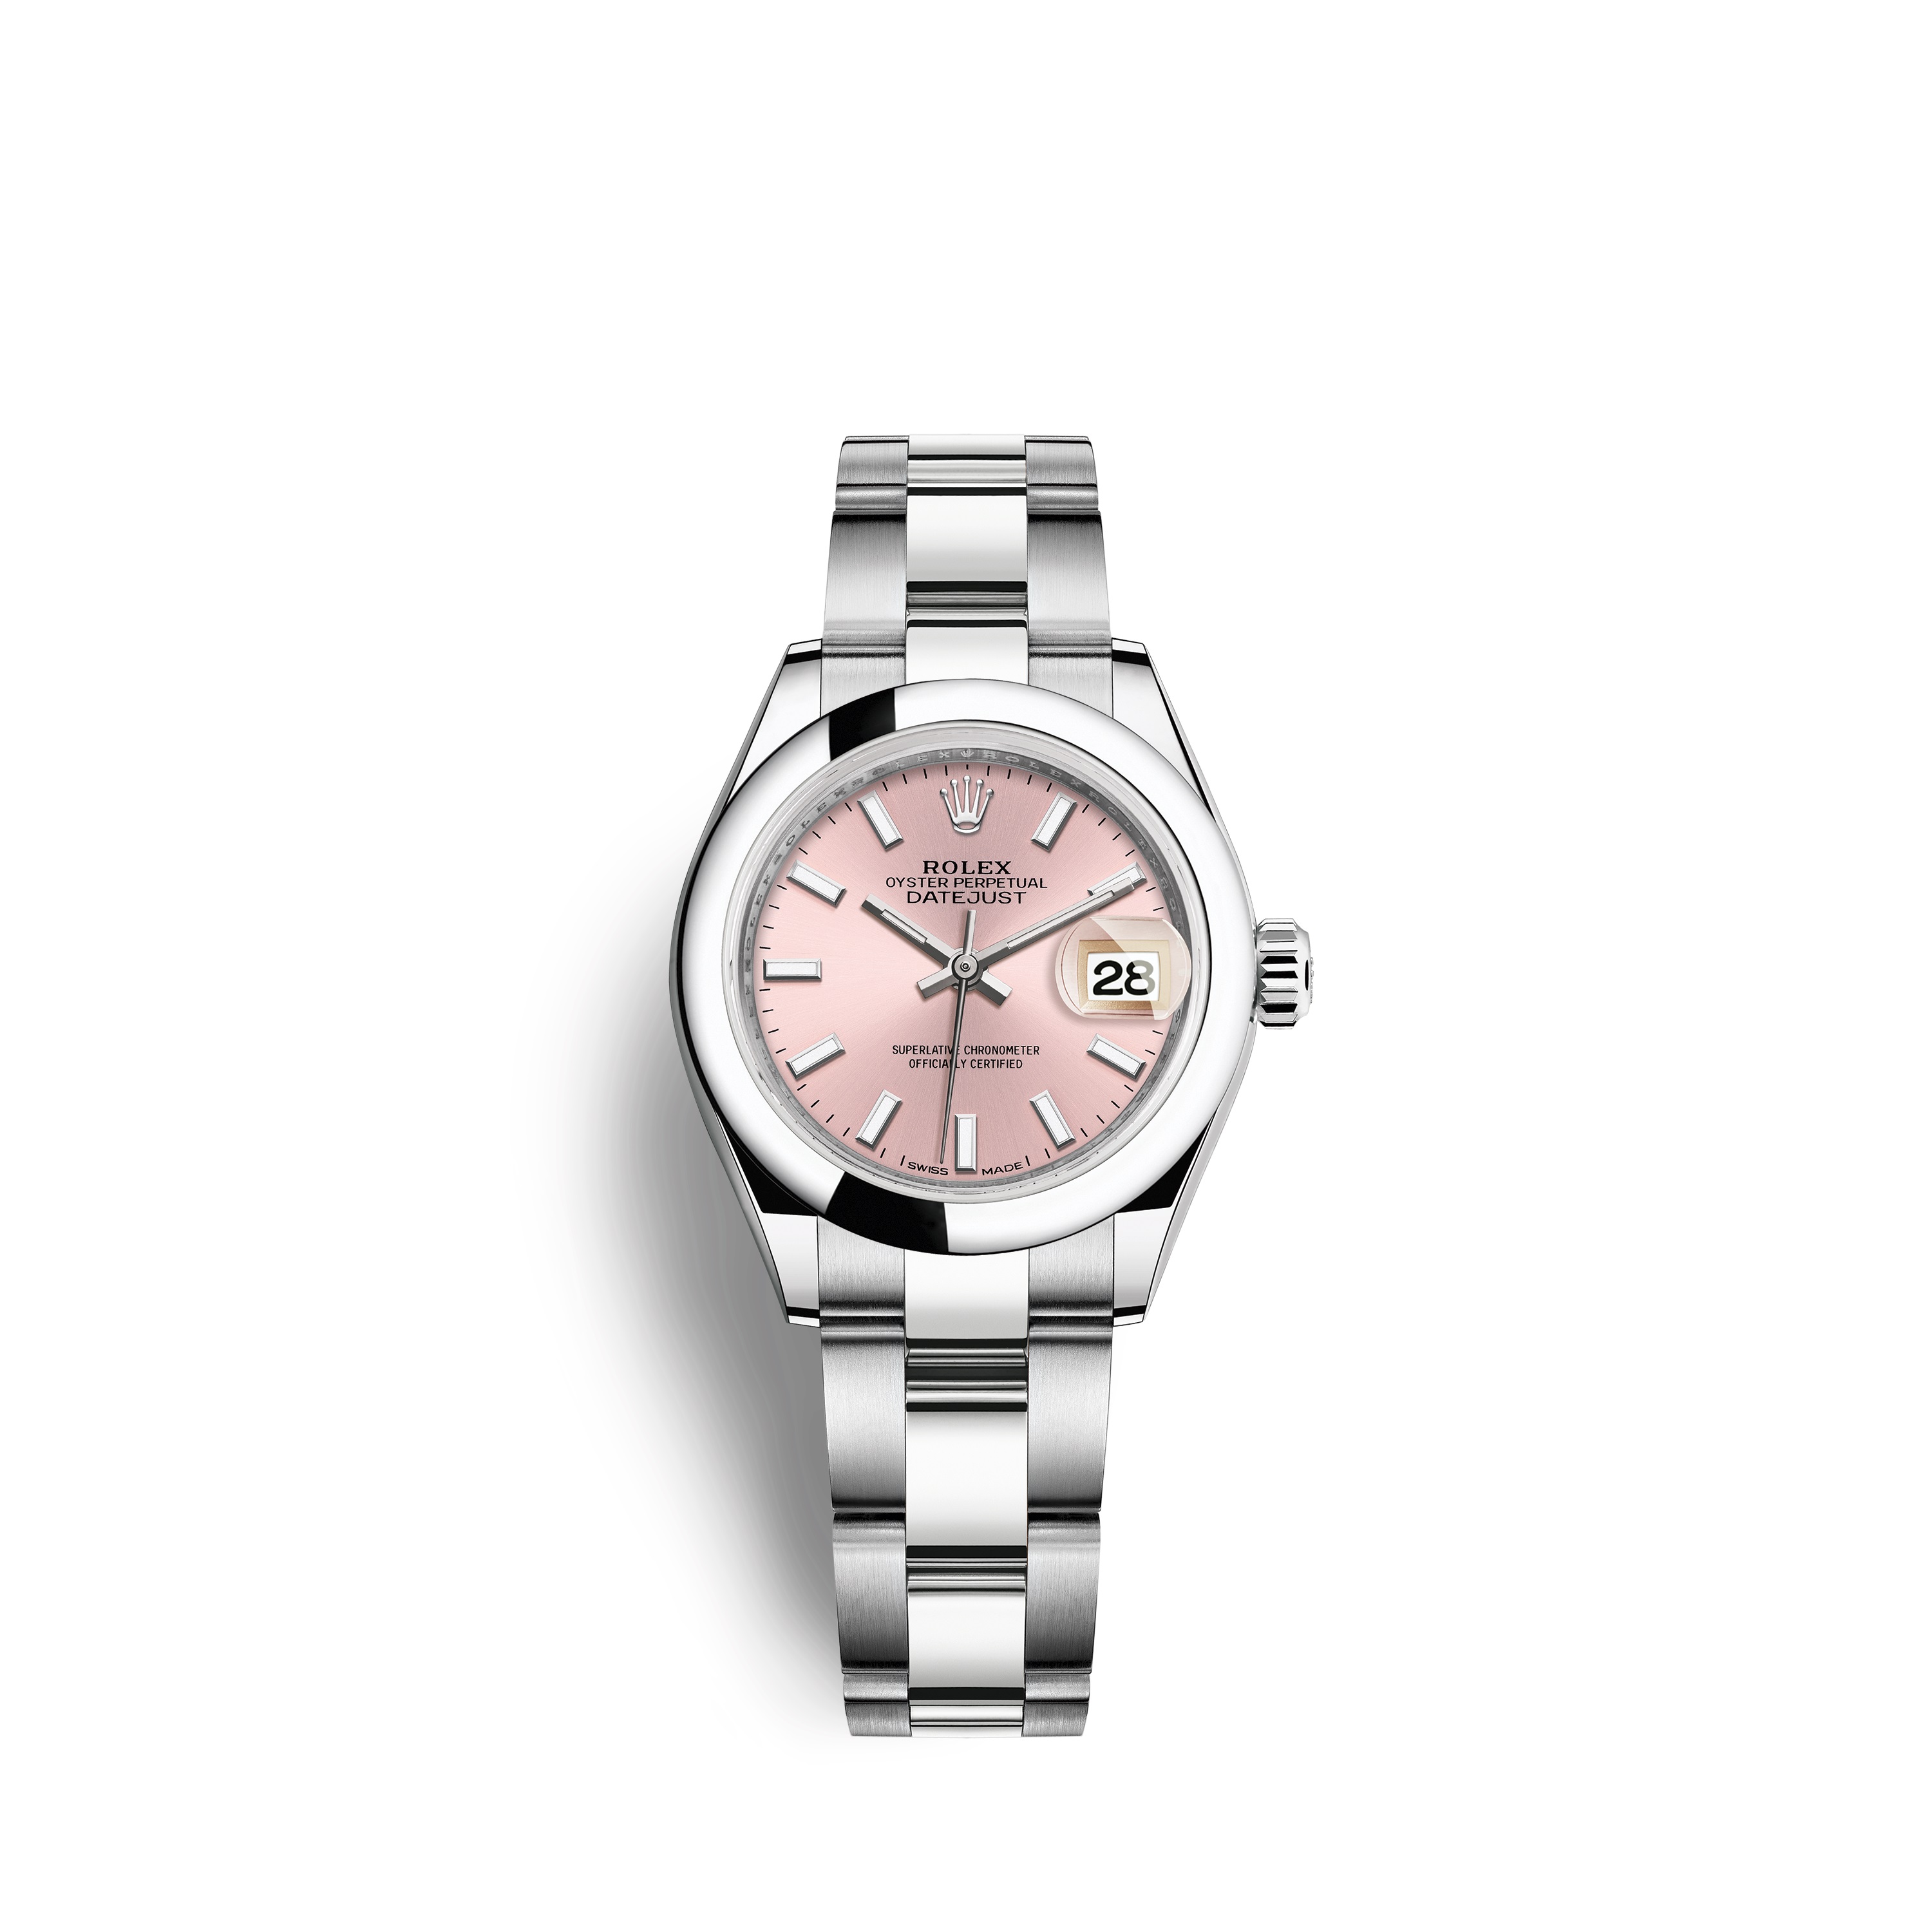 Lady-Datejust 28 279160 Stainless Steel Watch (Pink)